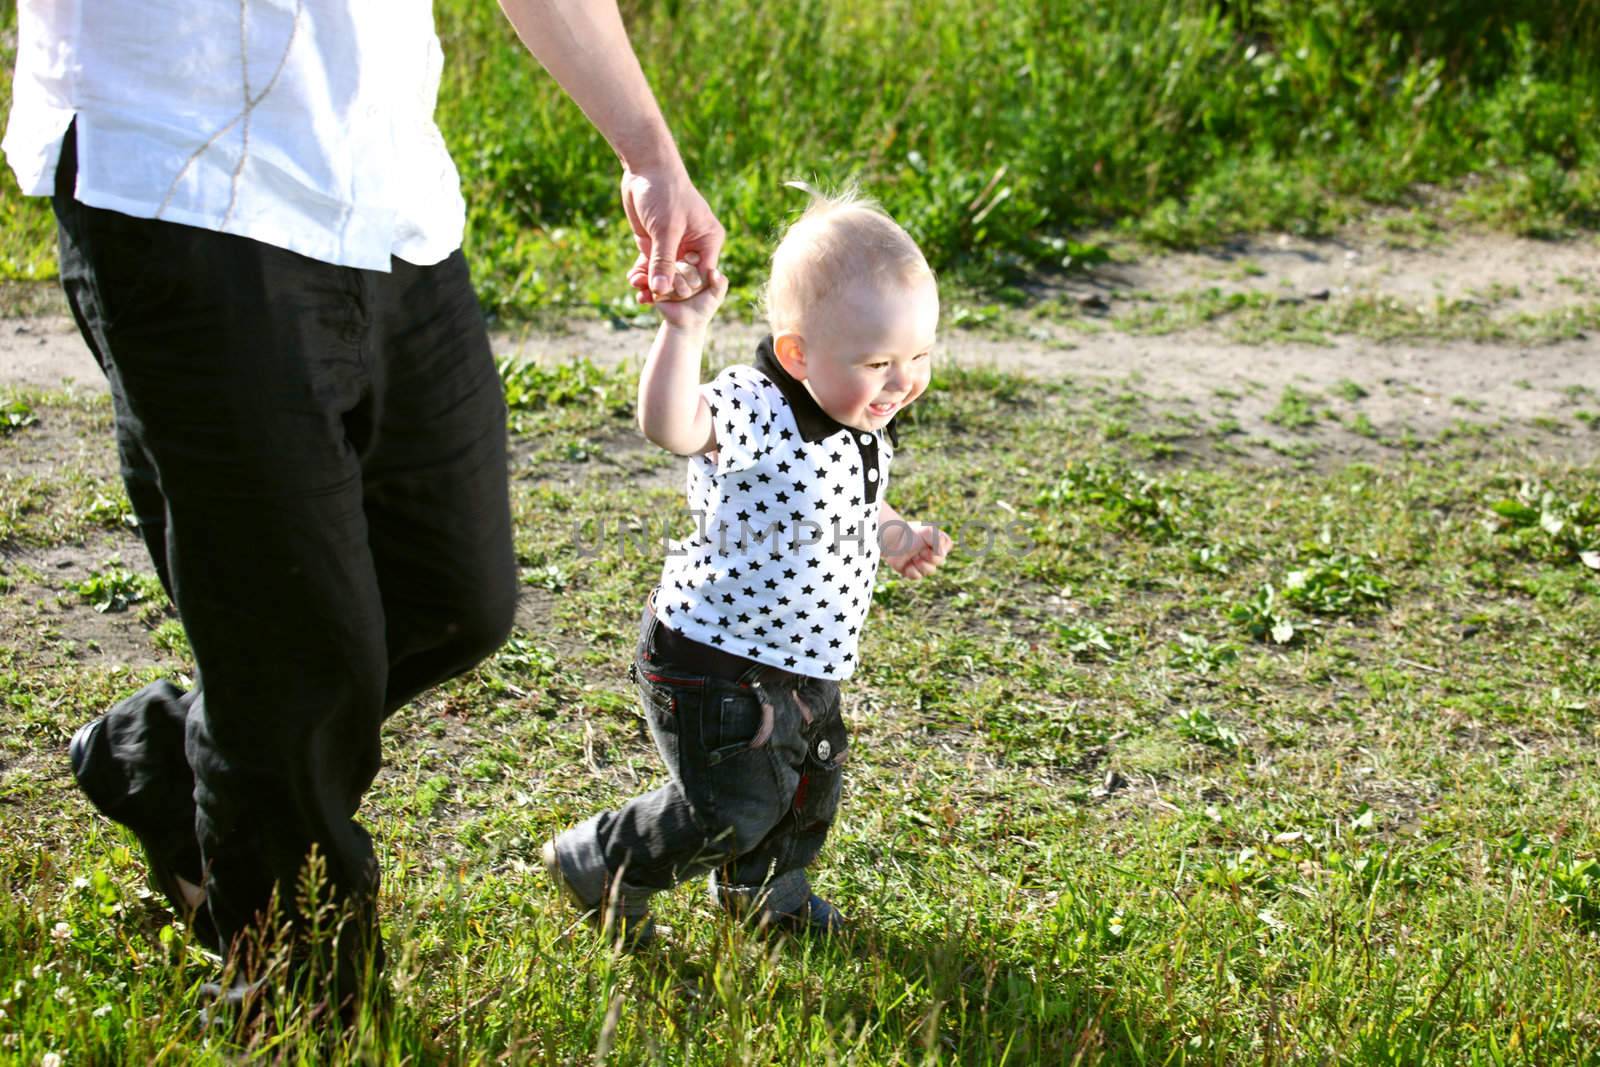 father and son walking on grass